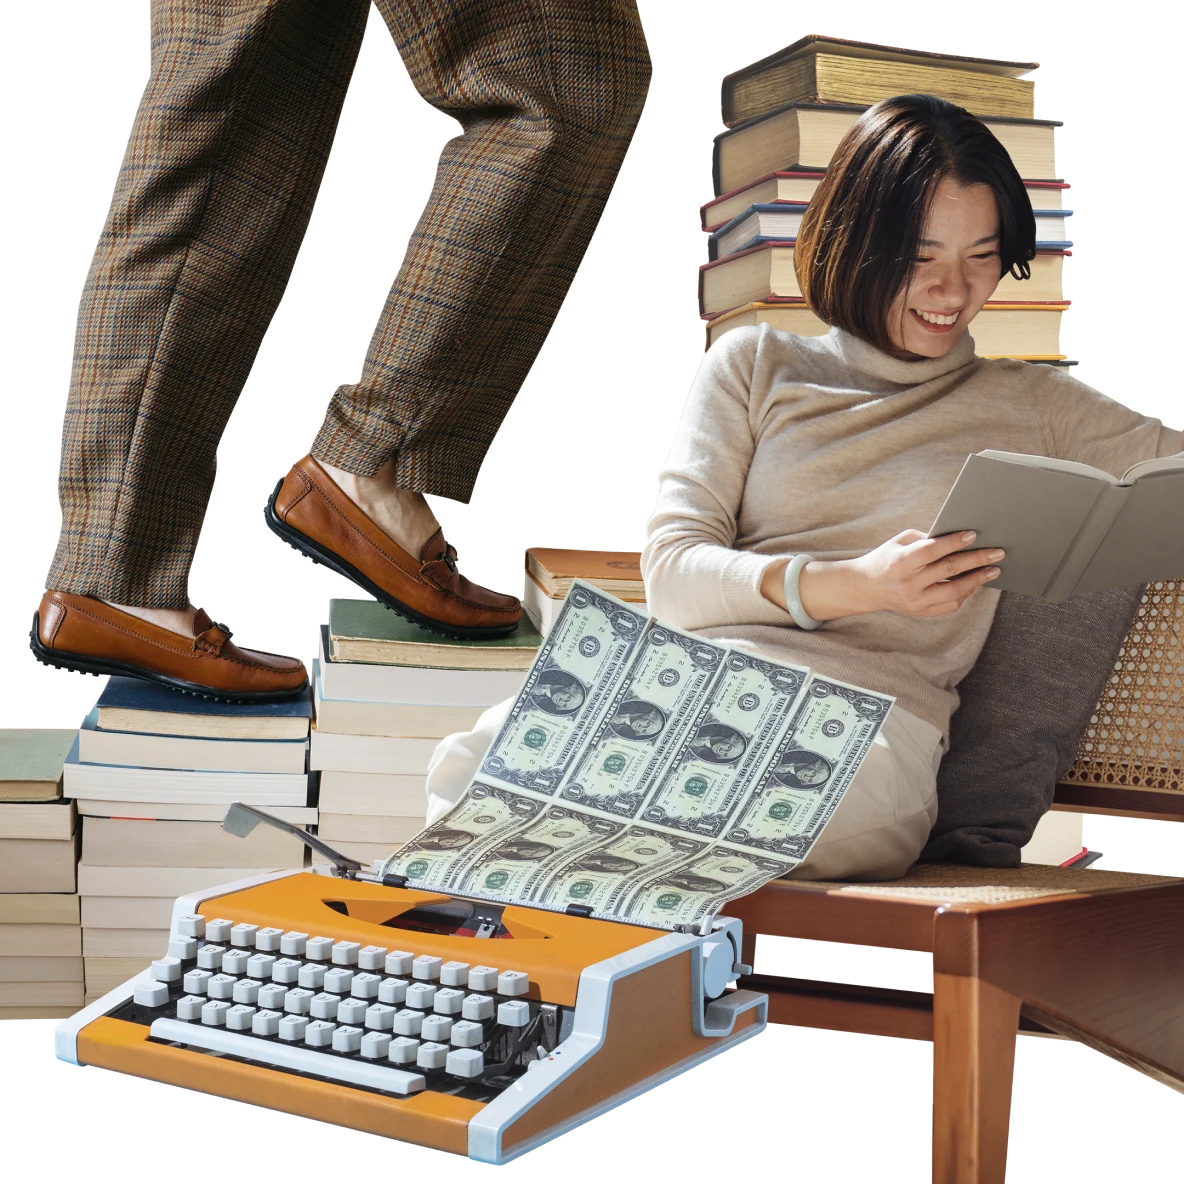 Collage of finance-themed items. East Asian woman dressed in tan on the right smiles and reads a notebook. Legs in plaid pants take steps up stacks of books on the right. Orange typewriter with white keys in the foreground prints sheets of dollar bills.